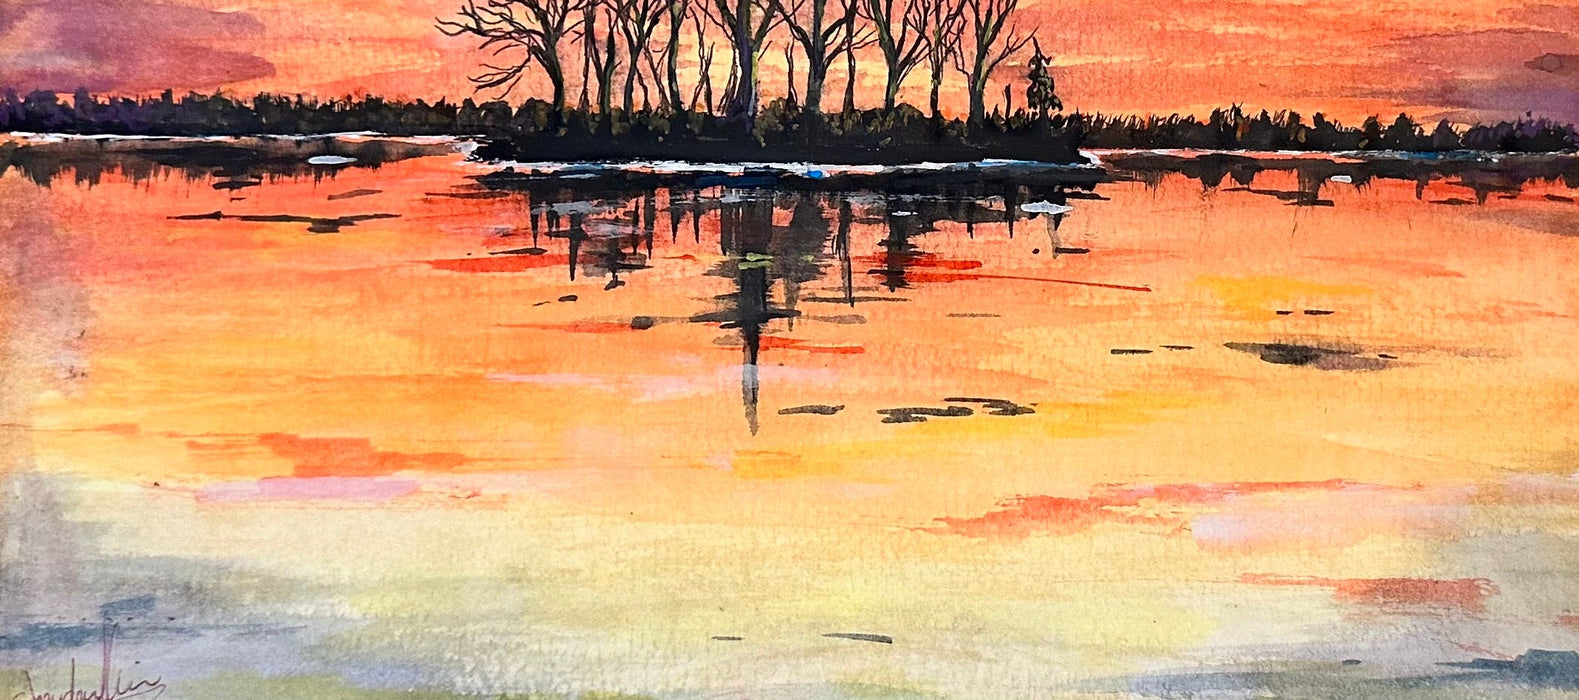 Landscape Sunset Watercolor Framed Painting, 15 x 12” by Shaida